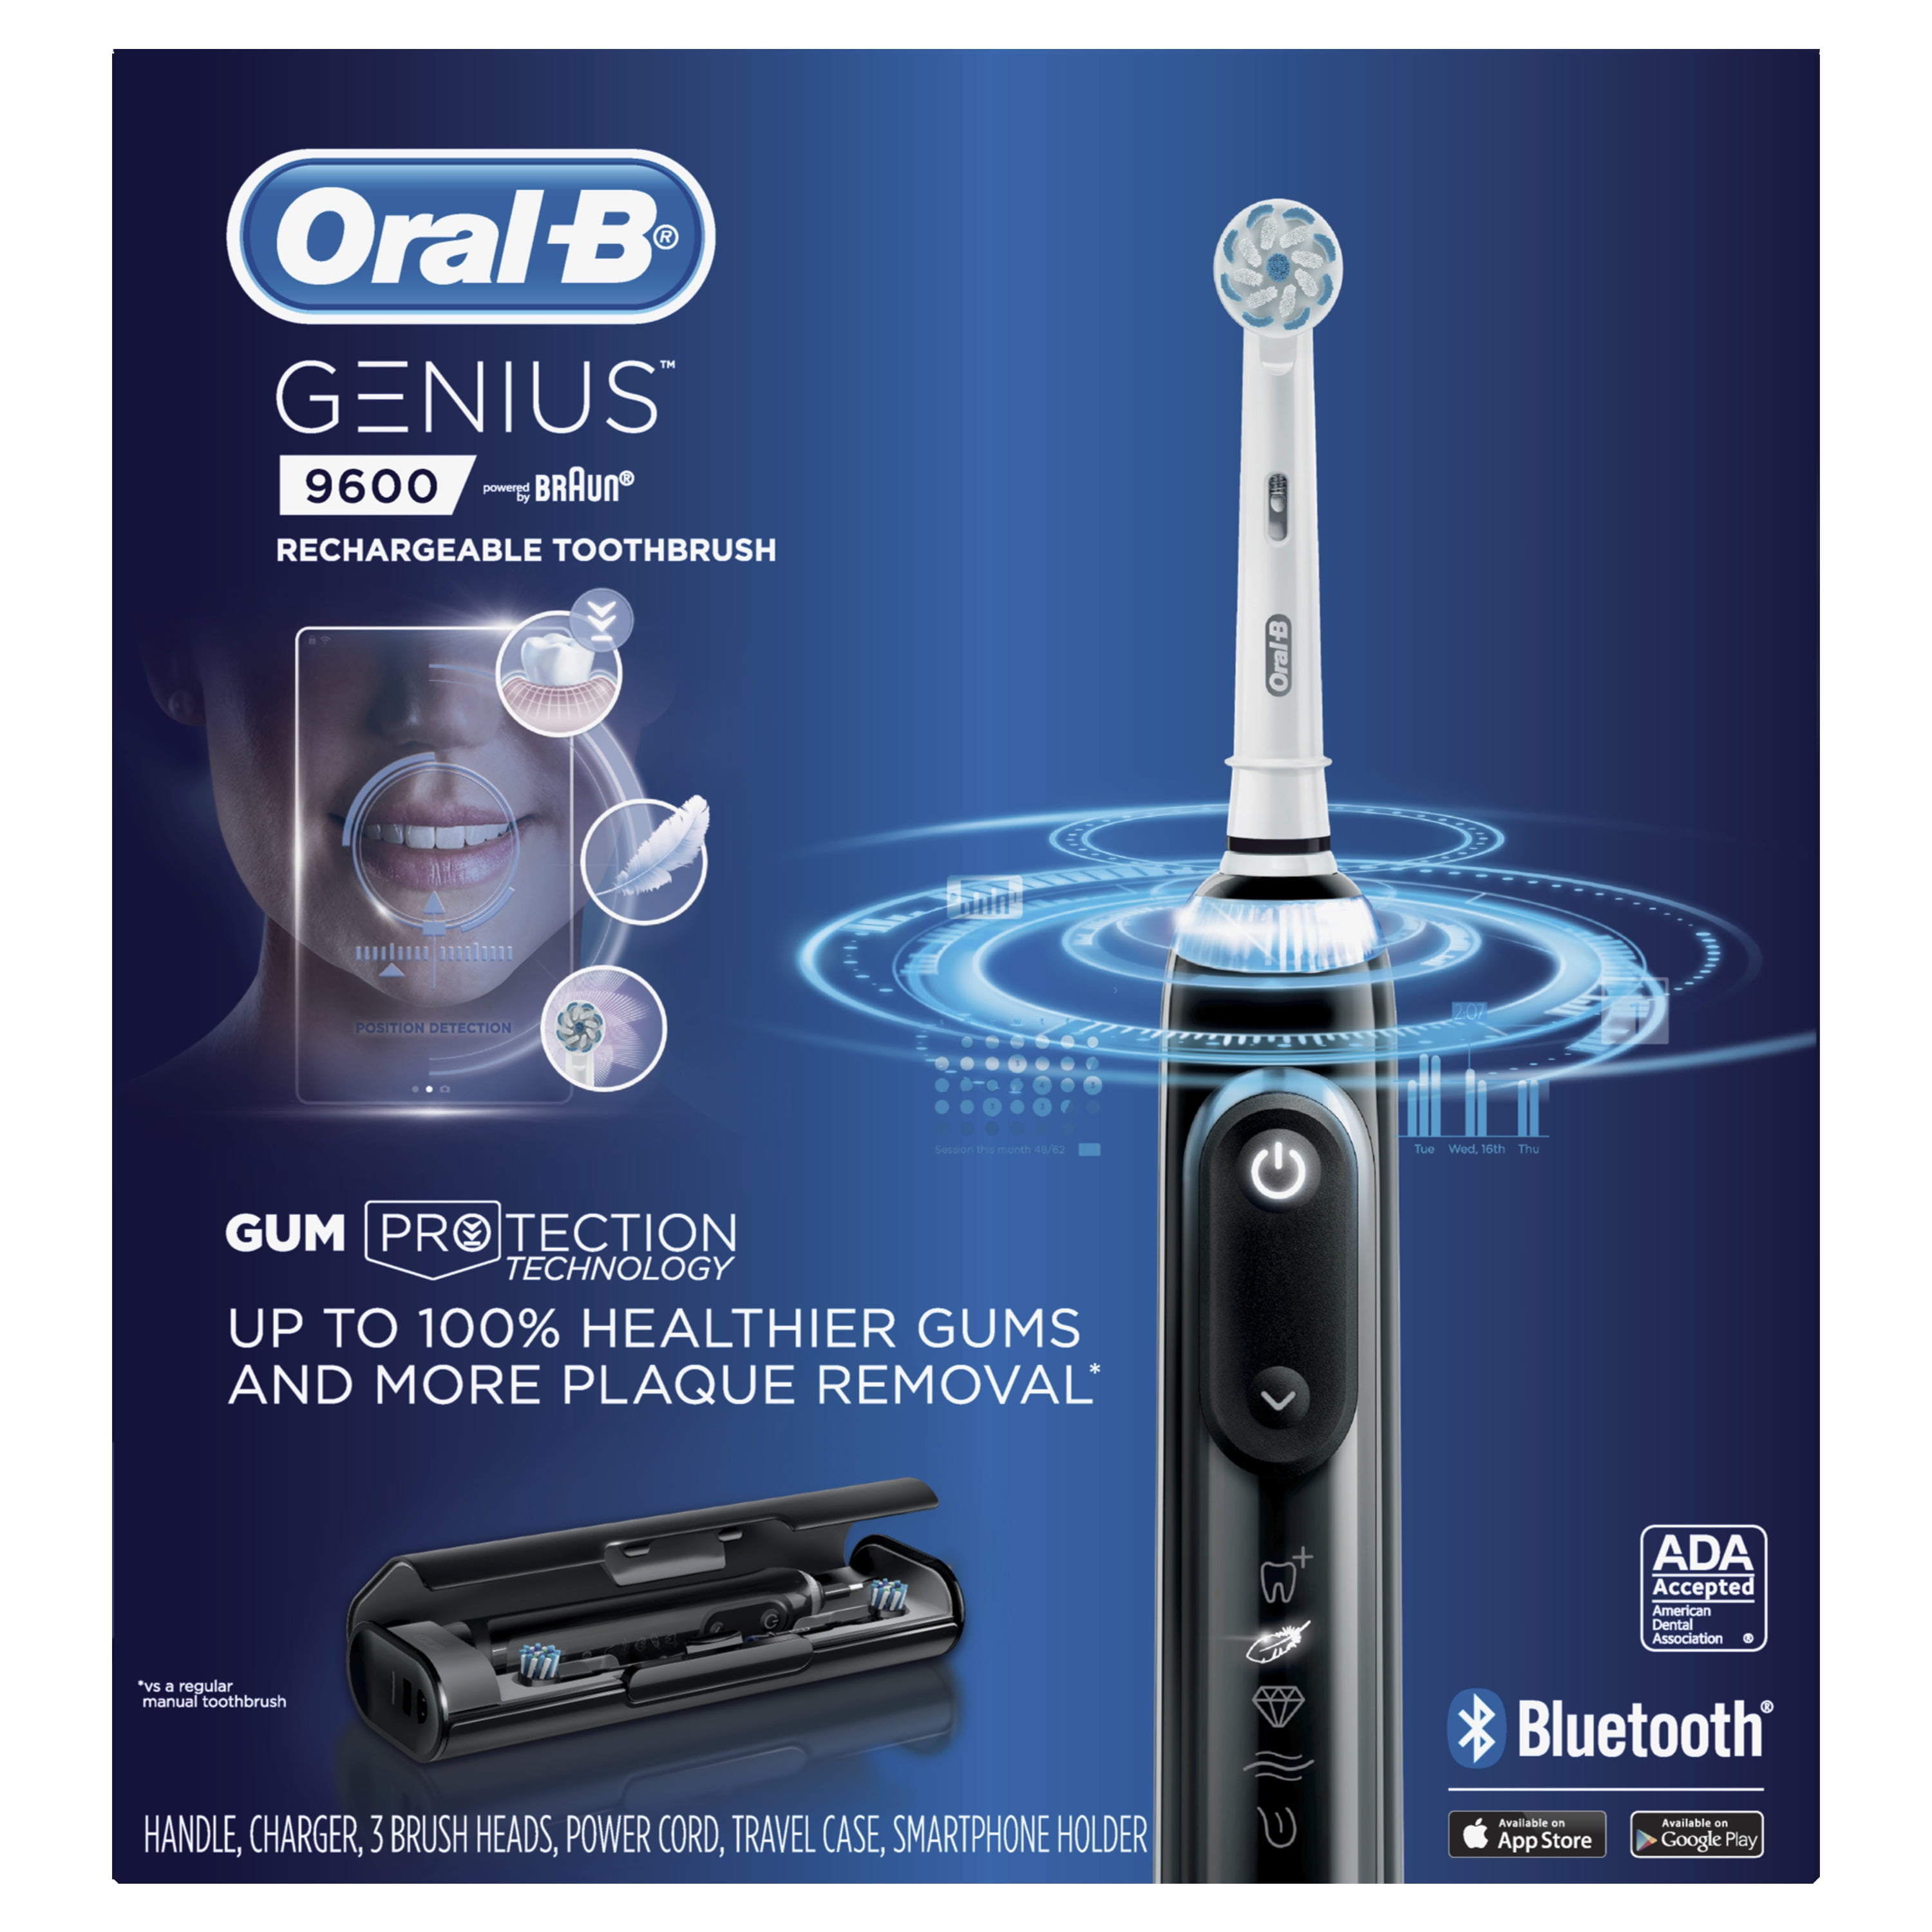 oral-b-professional-care-rechargeable-toothbrush-2-pk-costcochaser